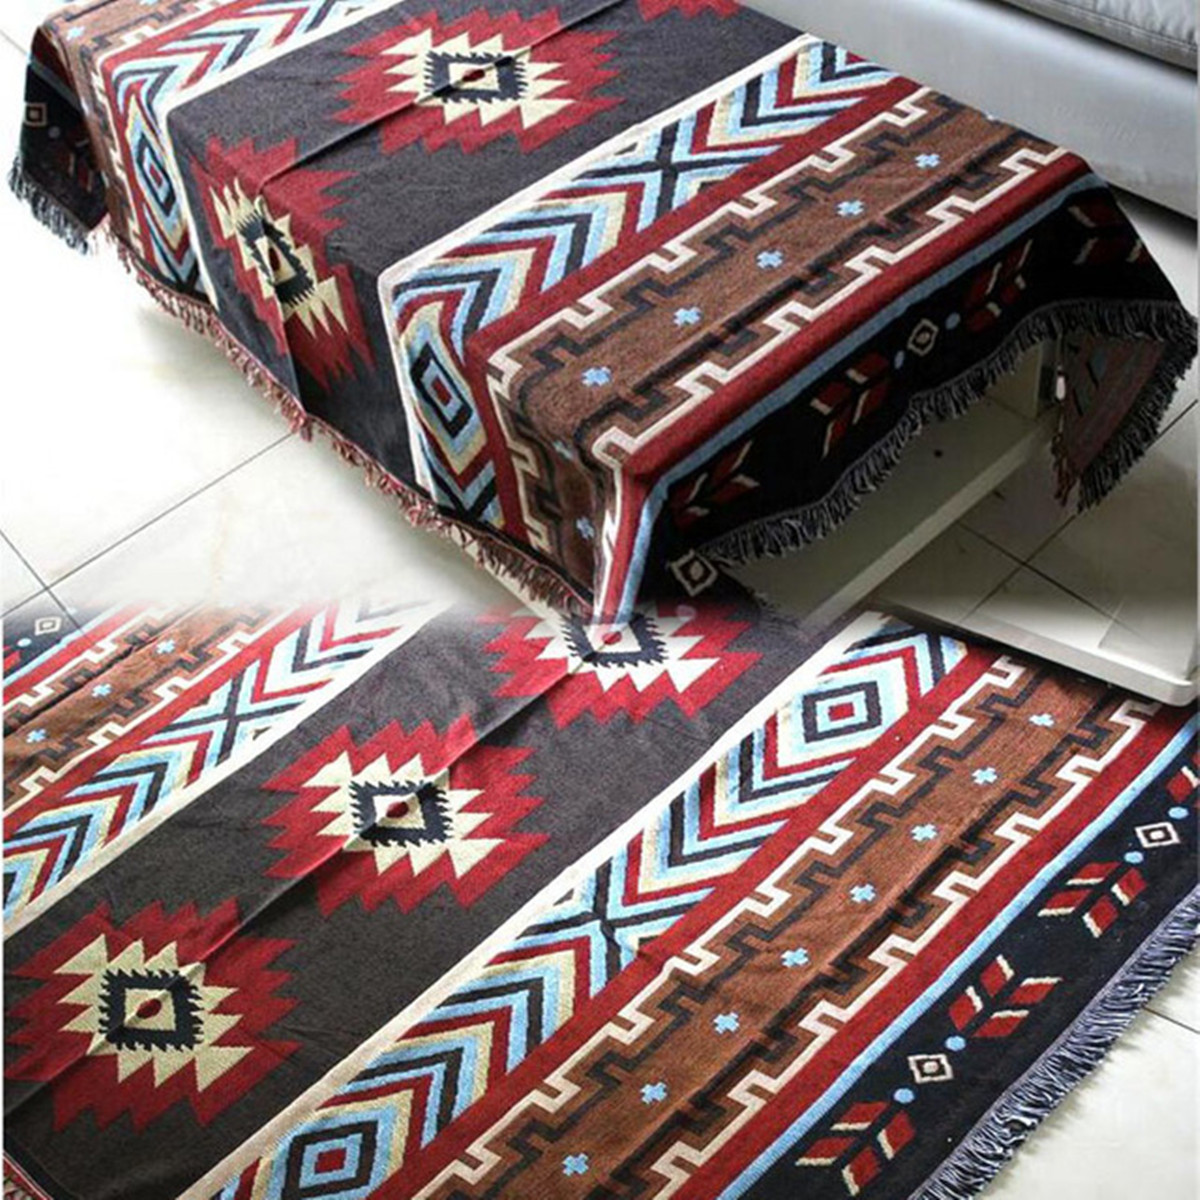 Home-Decoration-Aztec-Navajo-Towel-Mat-Throw-Wall-Hanging-Cotton-Rugs-Geometry-Woven-130160cm-1241567-4